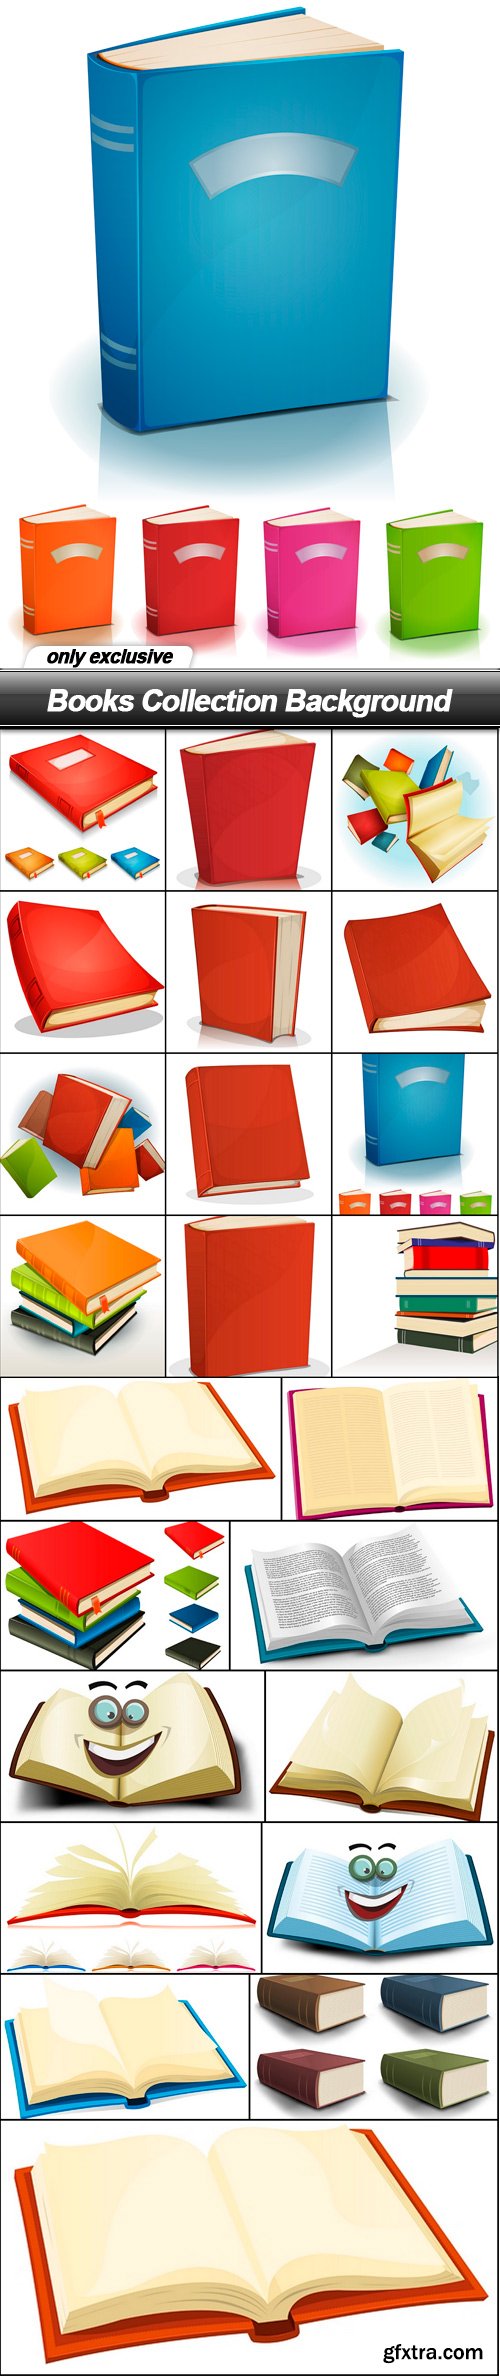 Books Collection Background - 23 EPS